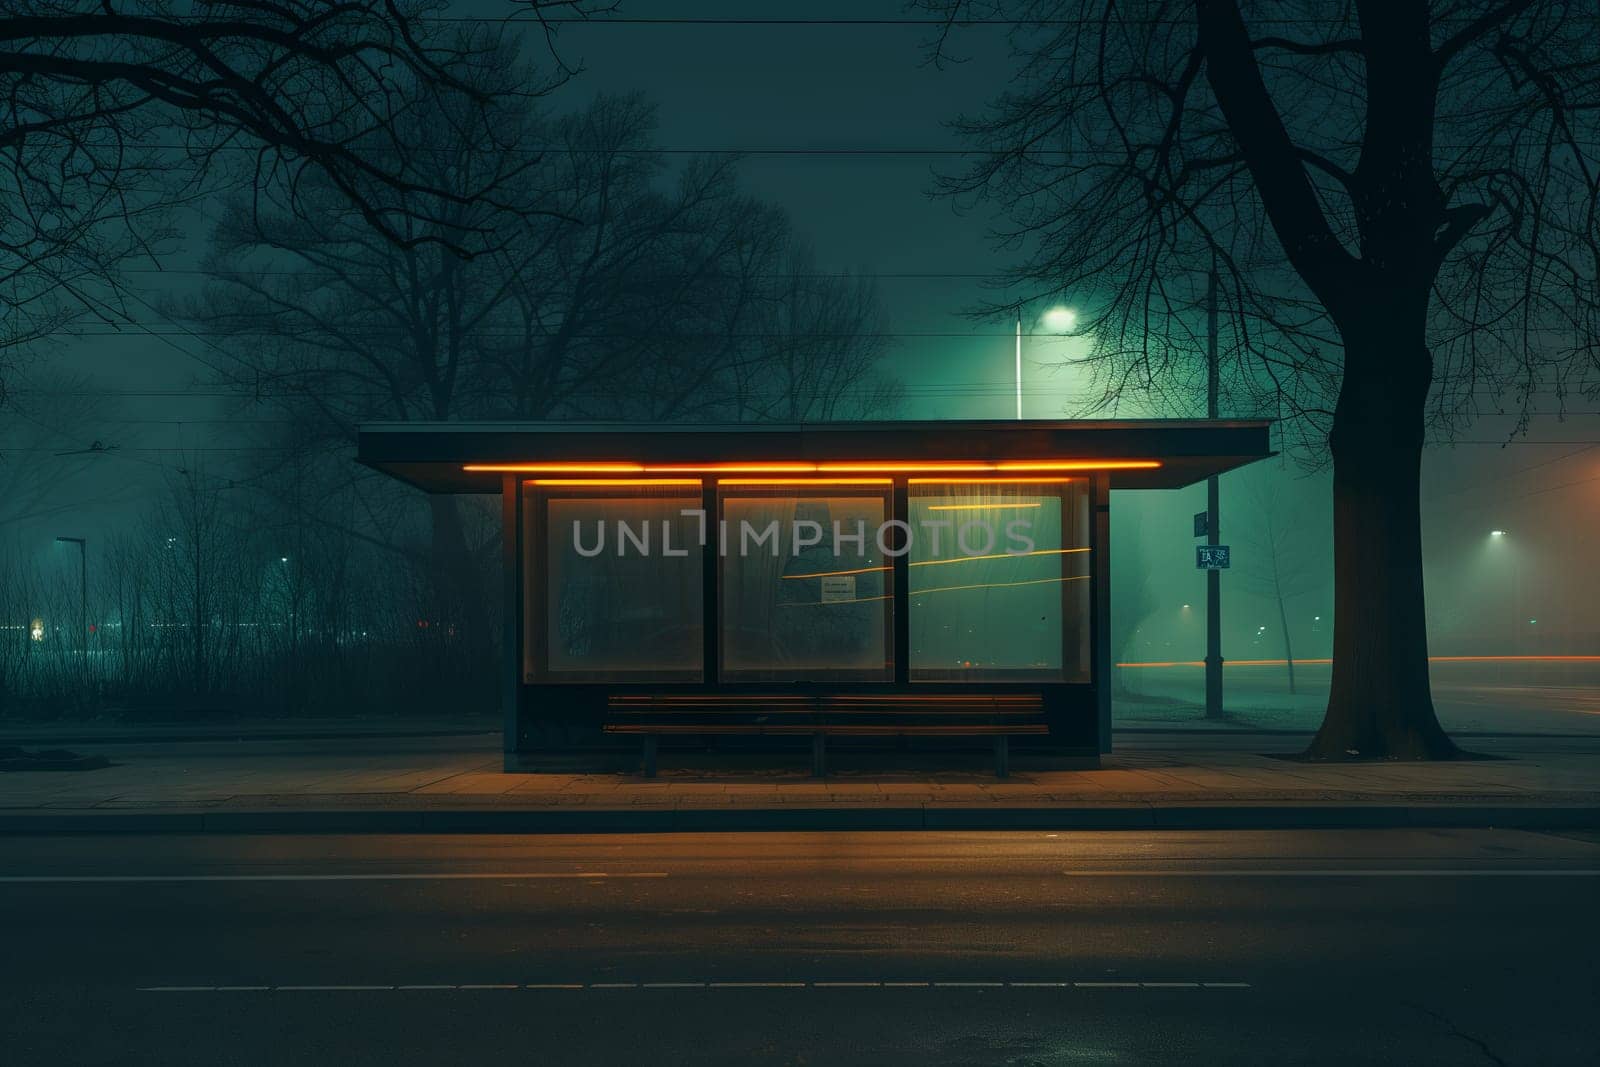 Amidst the foggy streets at midnight, a bus stop stands as a rectangle of shade under a tree, illuminated by automotive lighting. The sky tinted with shades of gas and wood